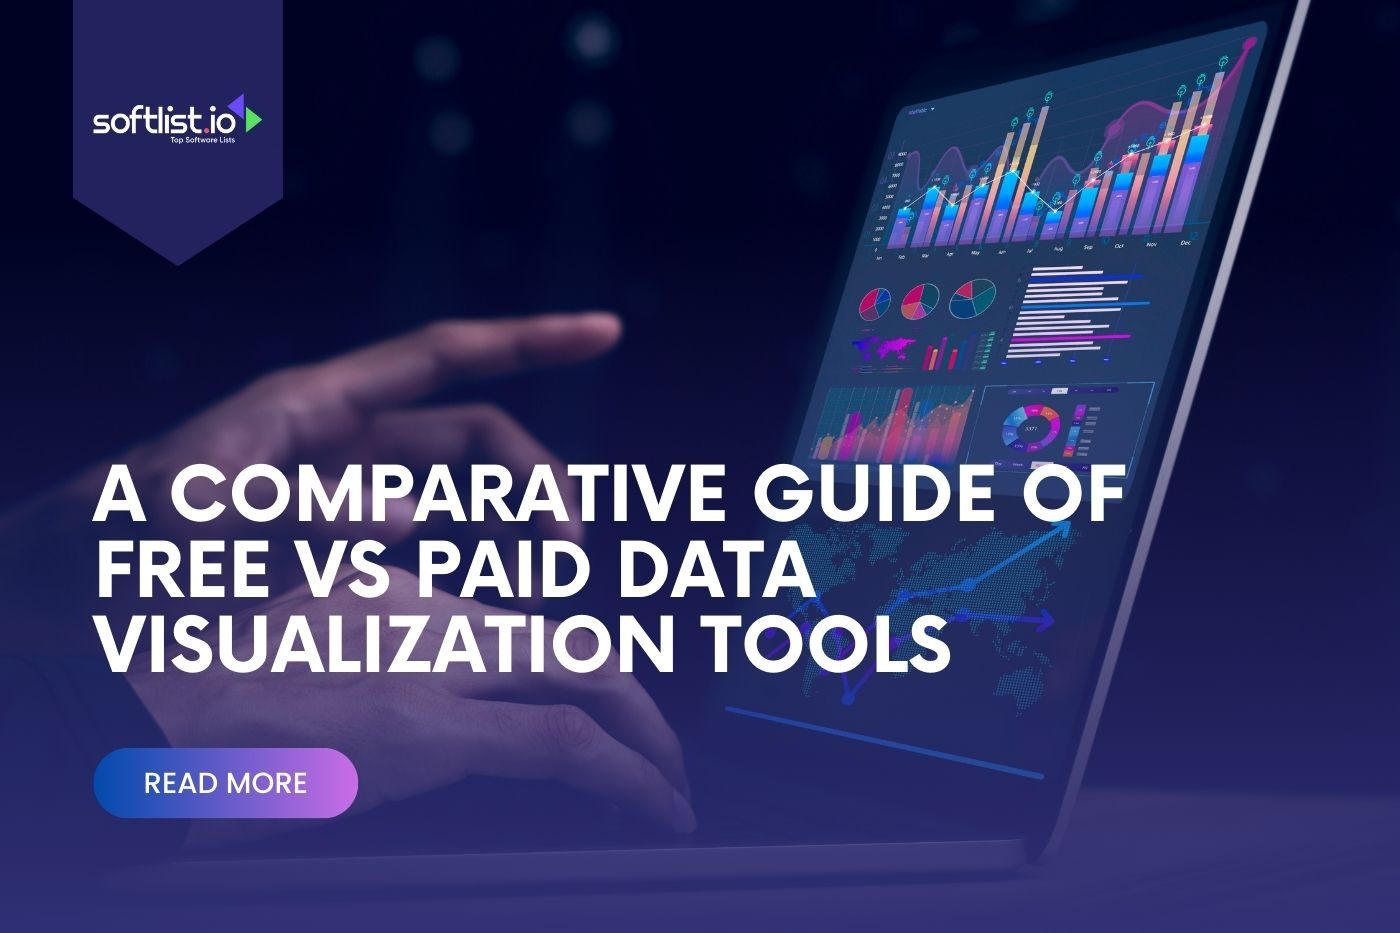 A Comparative Guide of Free vs Paid Data Visualization Tools